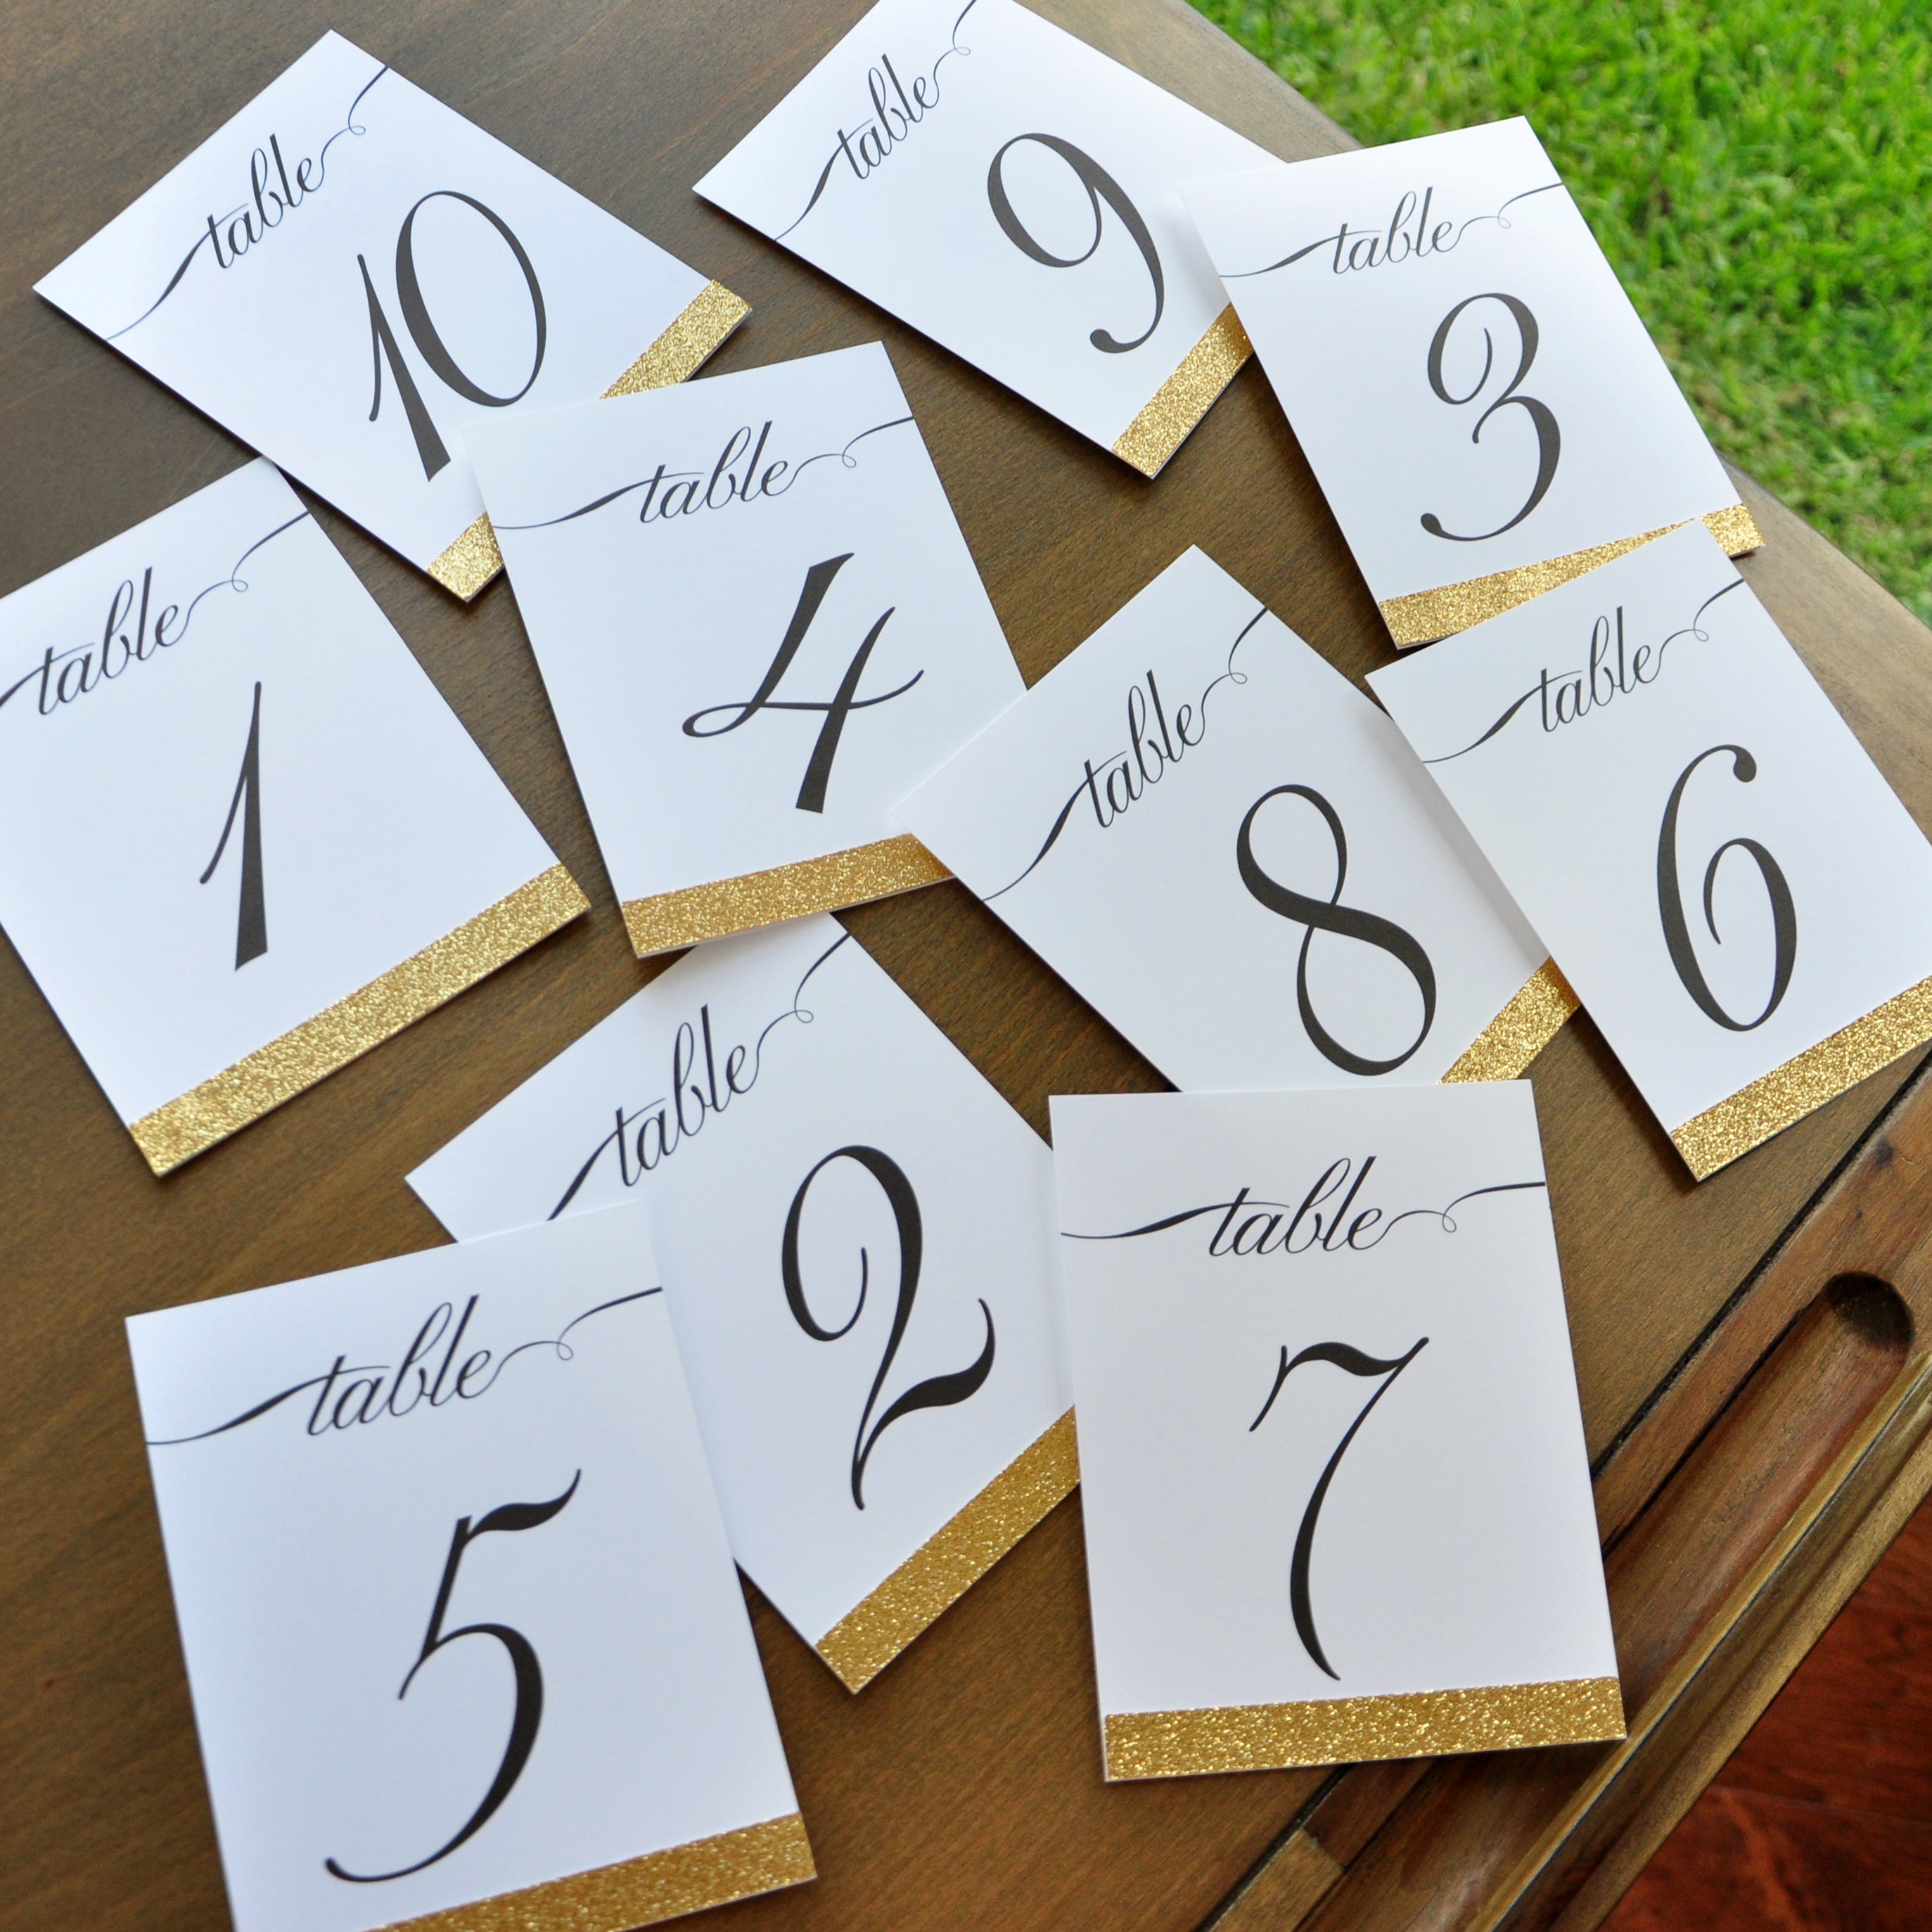 15+ Table Number Card Wedding Pics